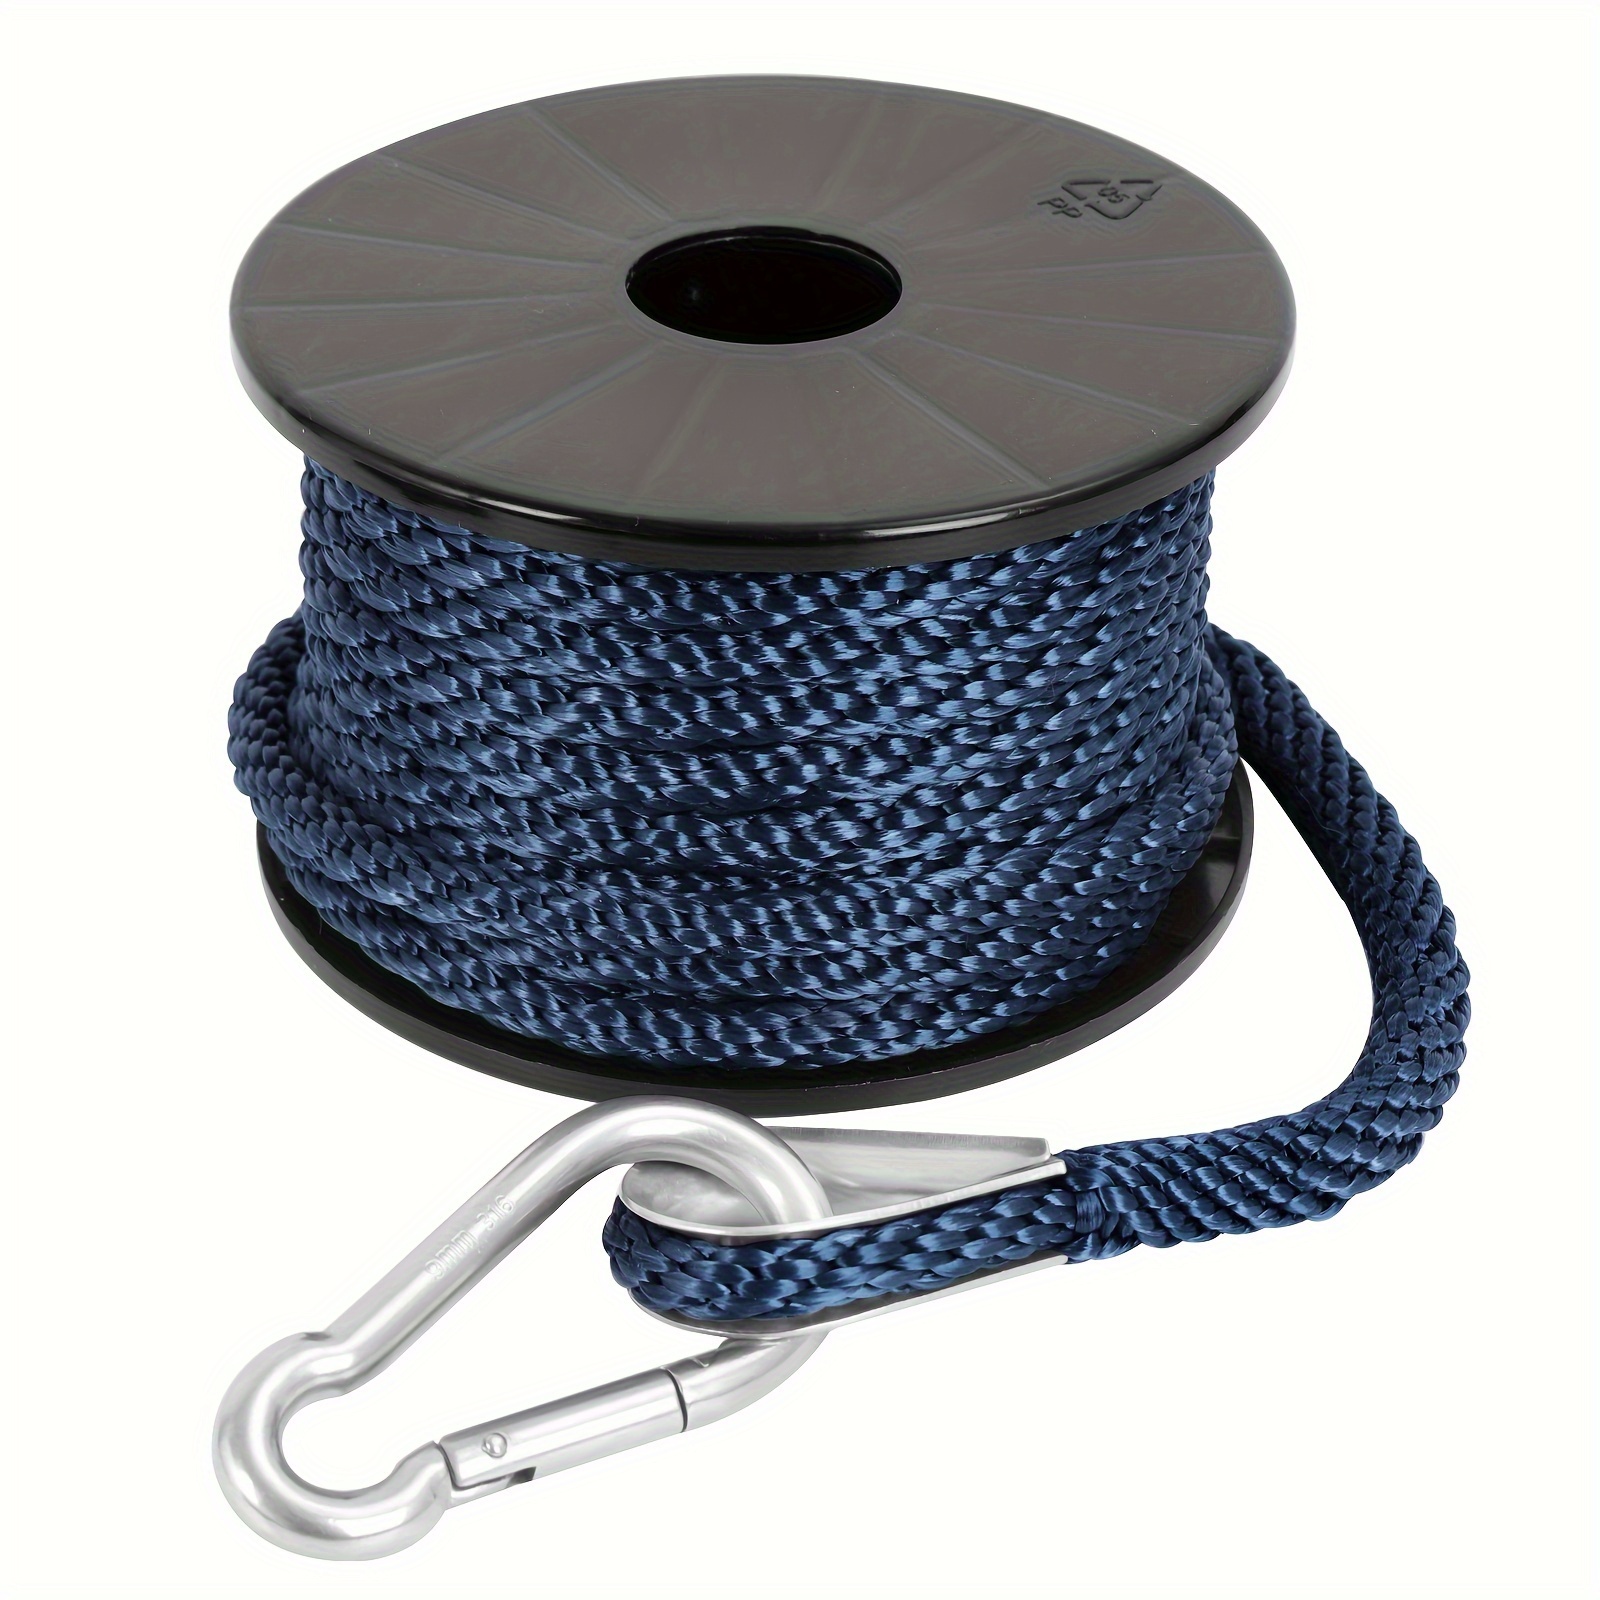 Double Braided Nylon Boat Anchor Rope With 316 Stainless Steel